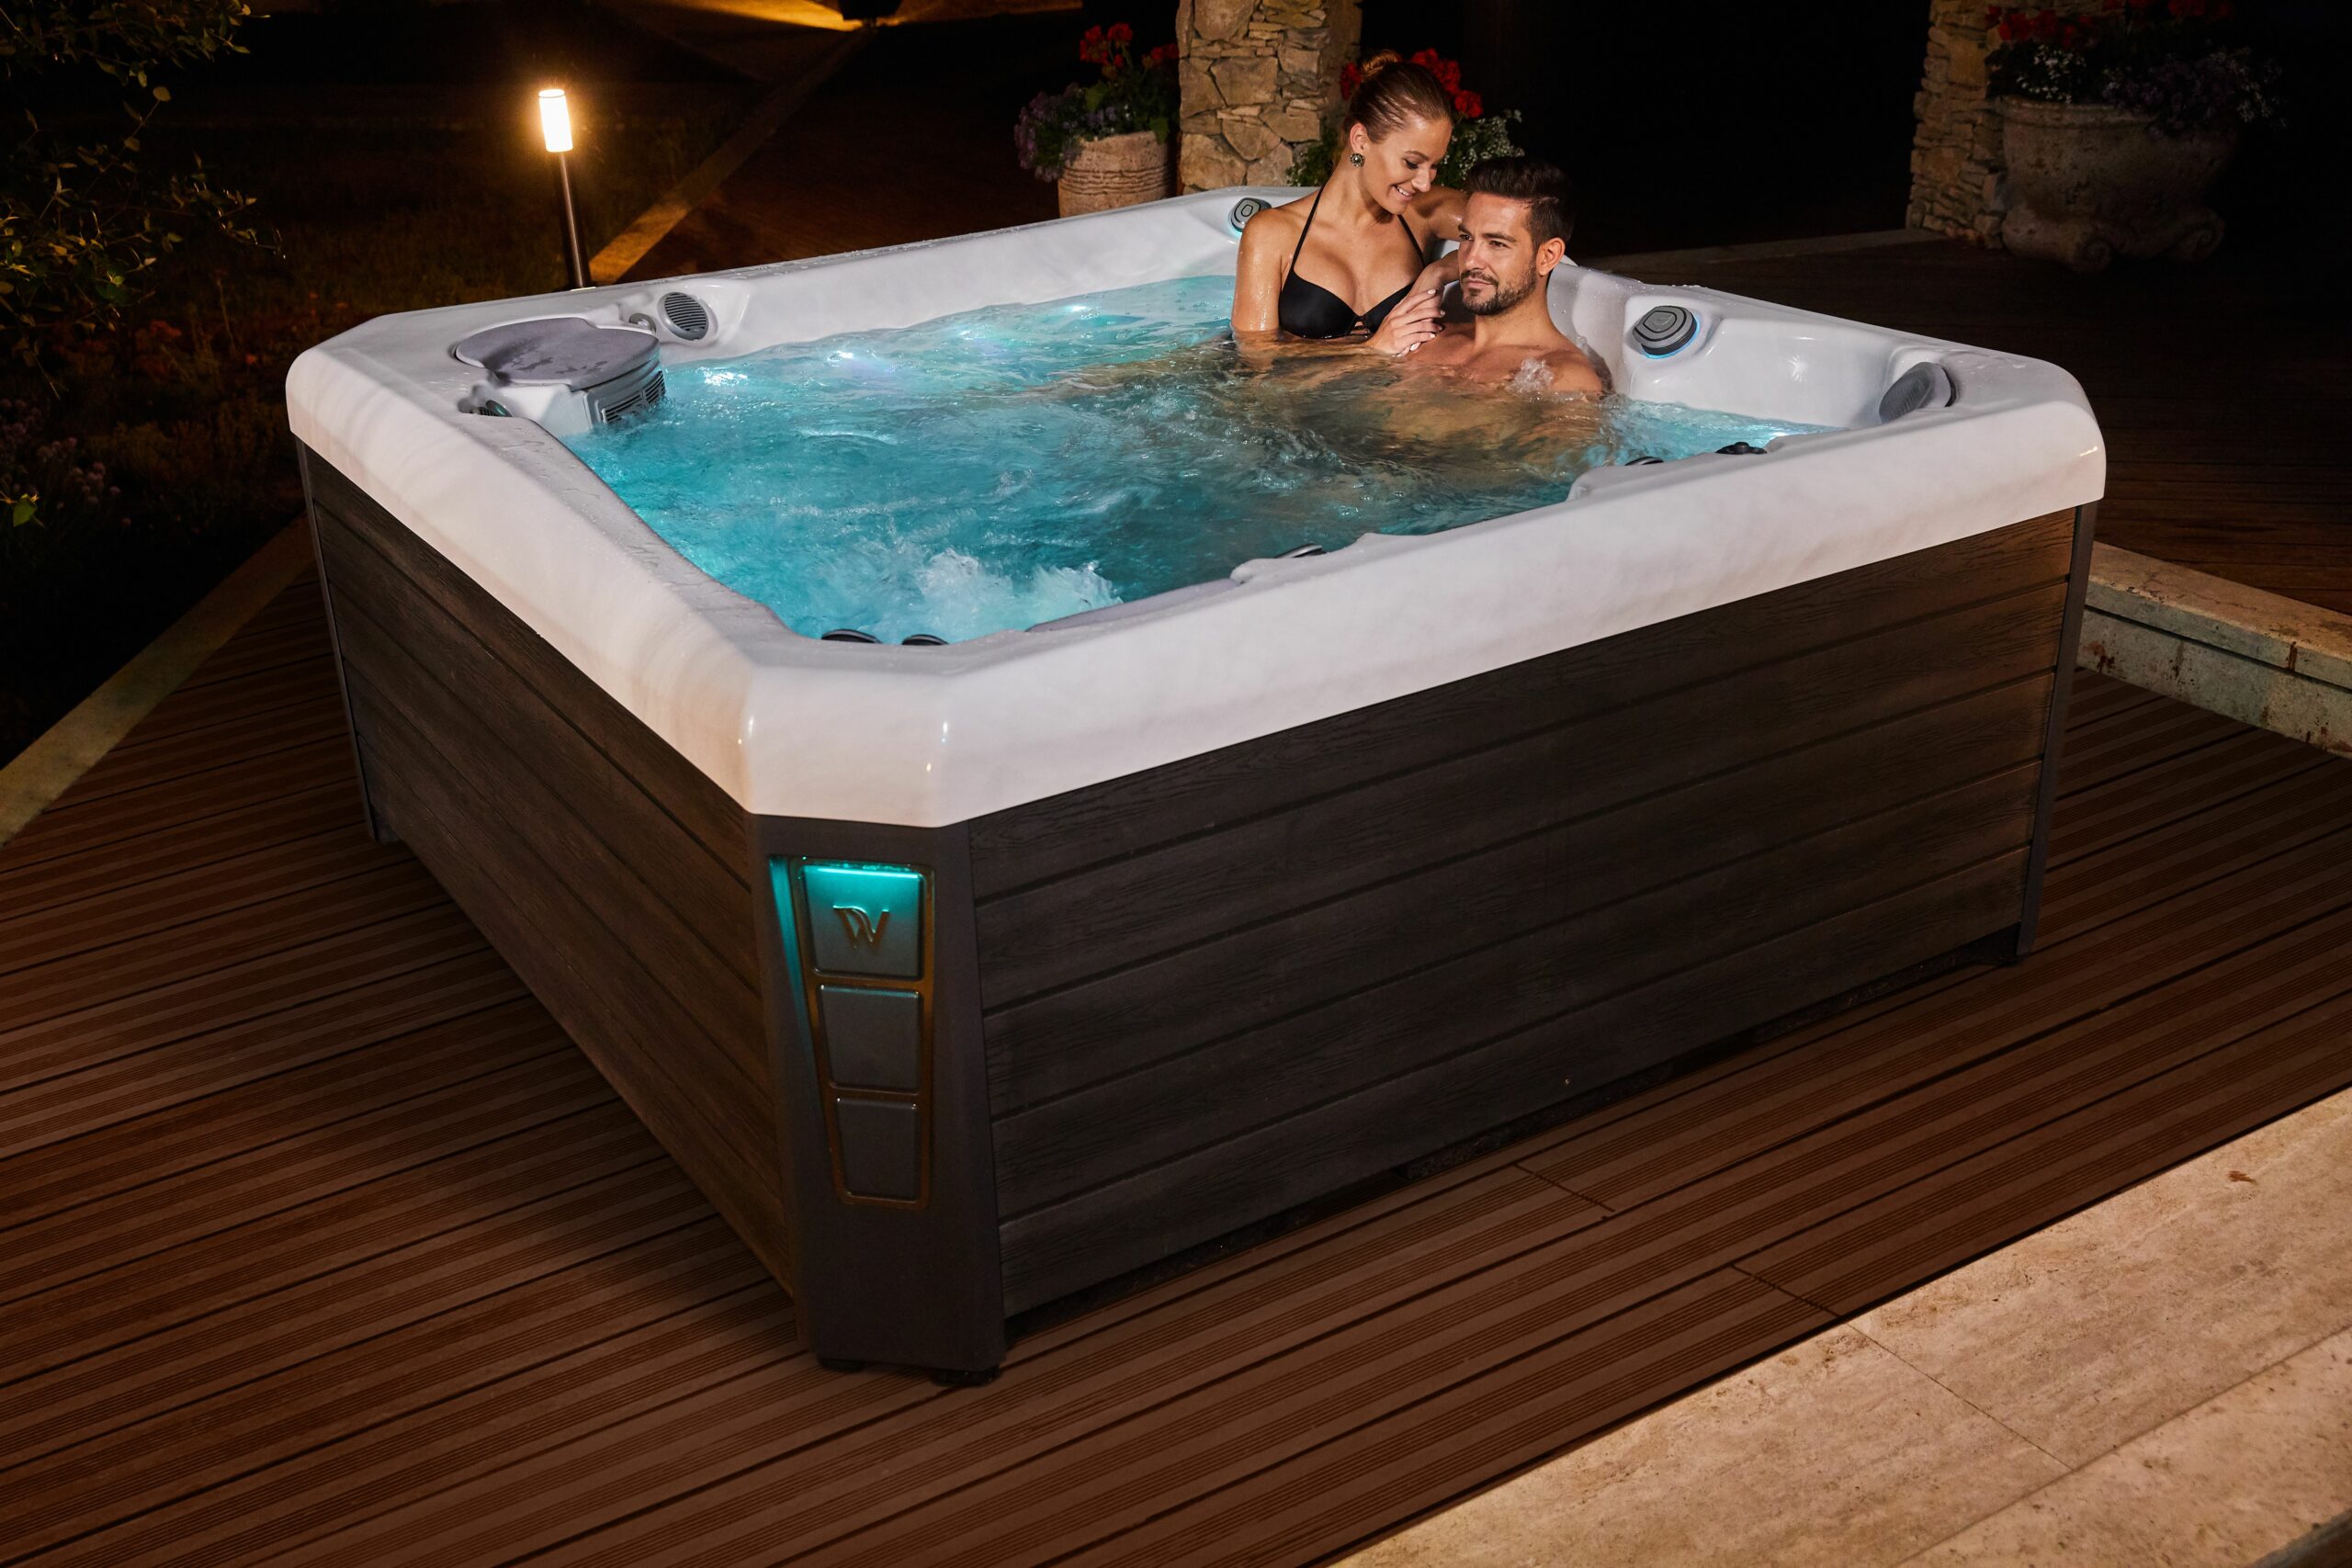 3 ways to convince your significant other you NEED a hot tub!